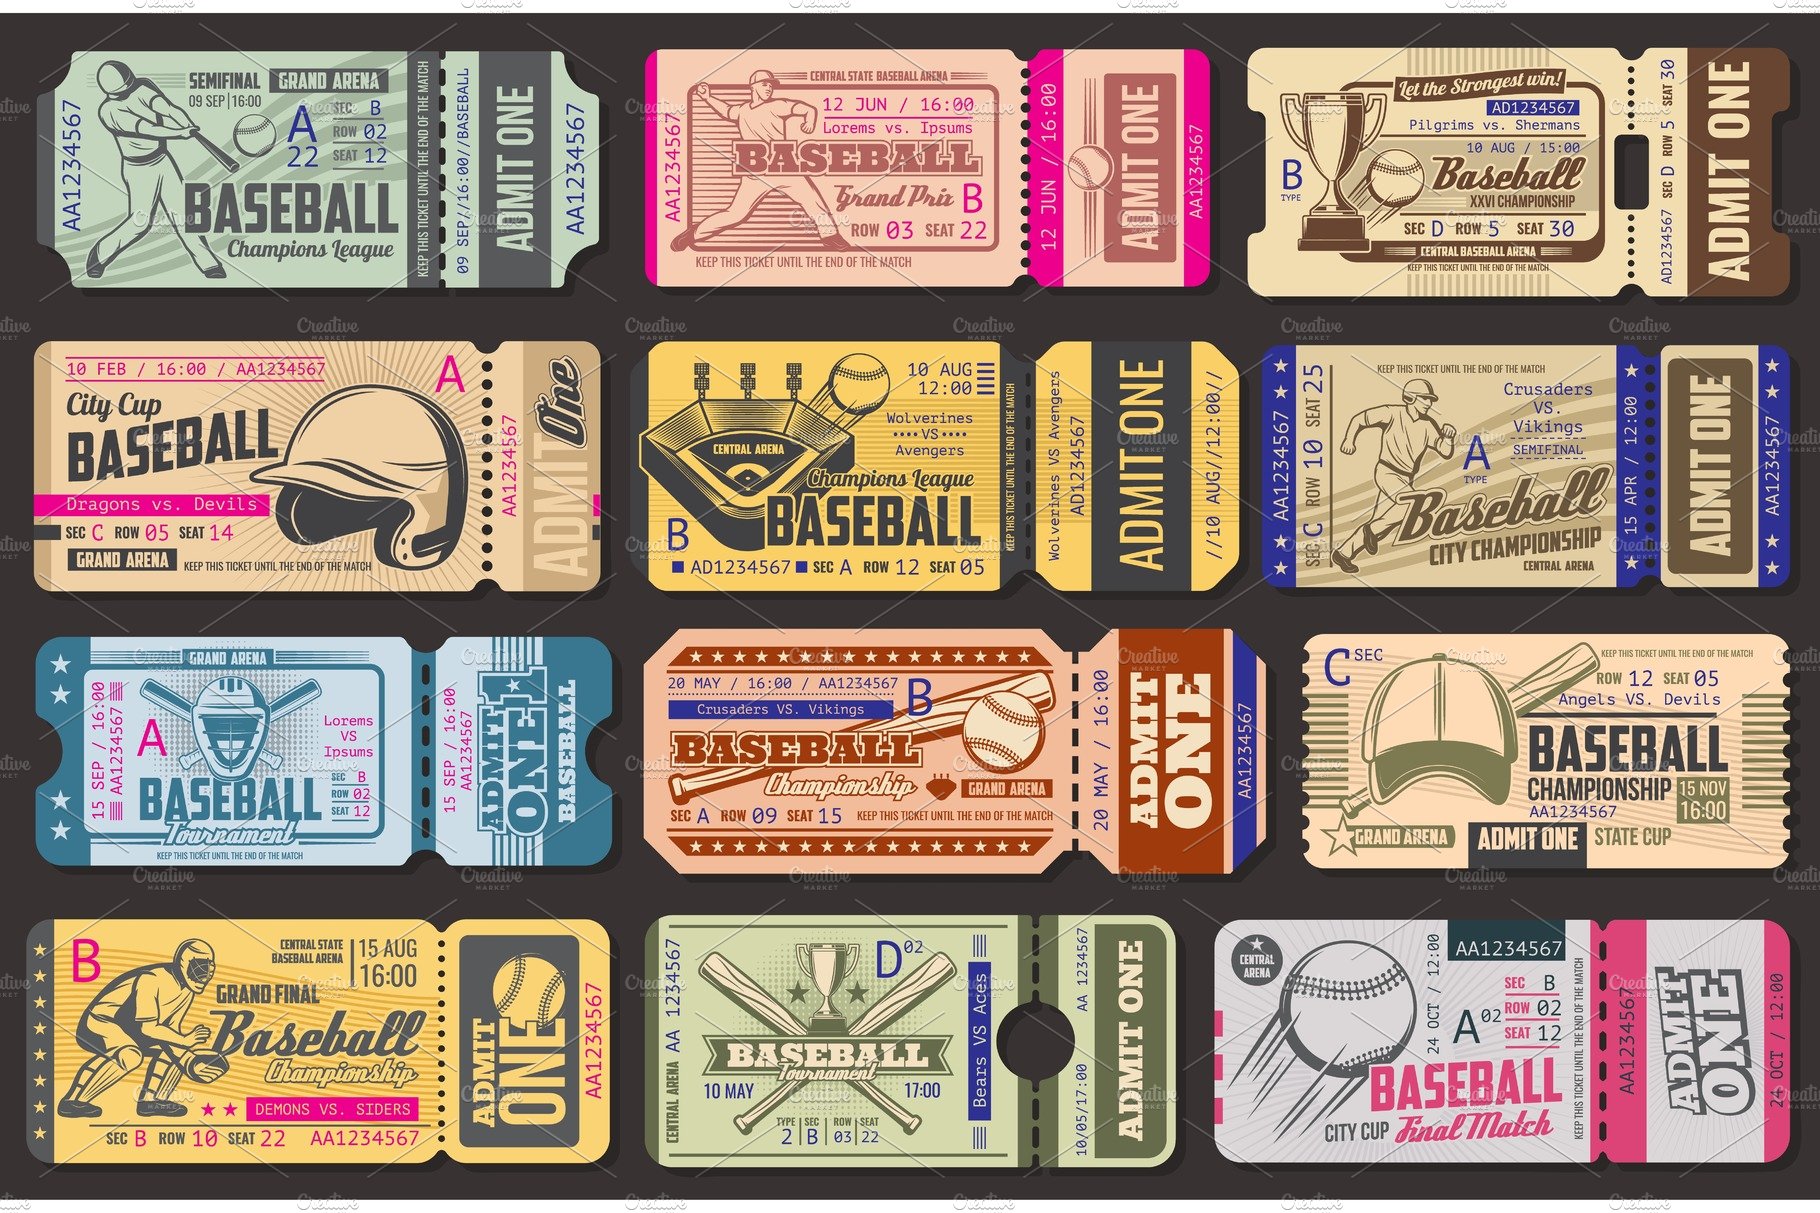 Vector admission tickets, baseball cover image.